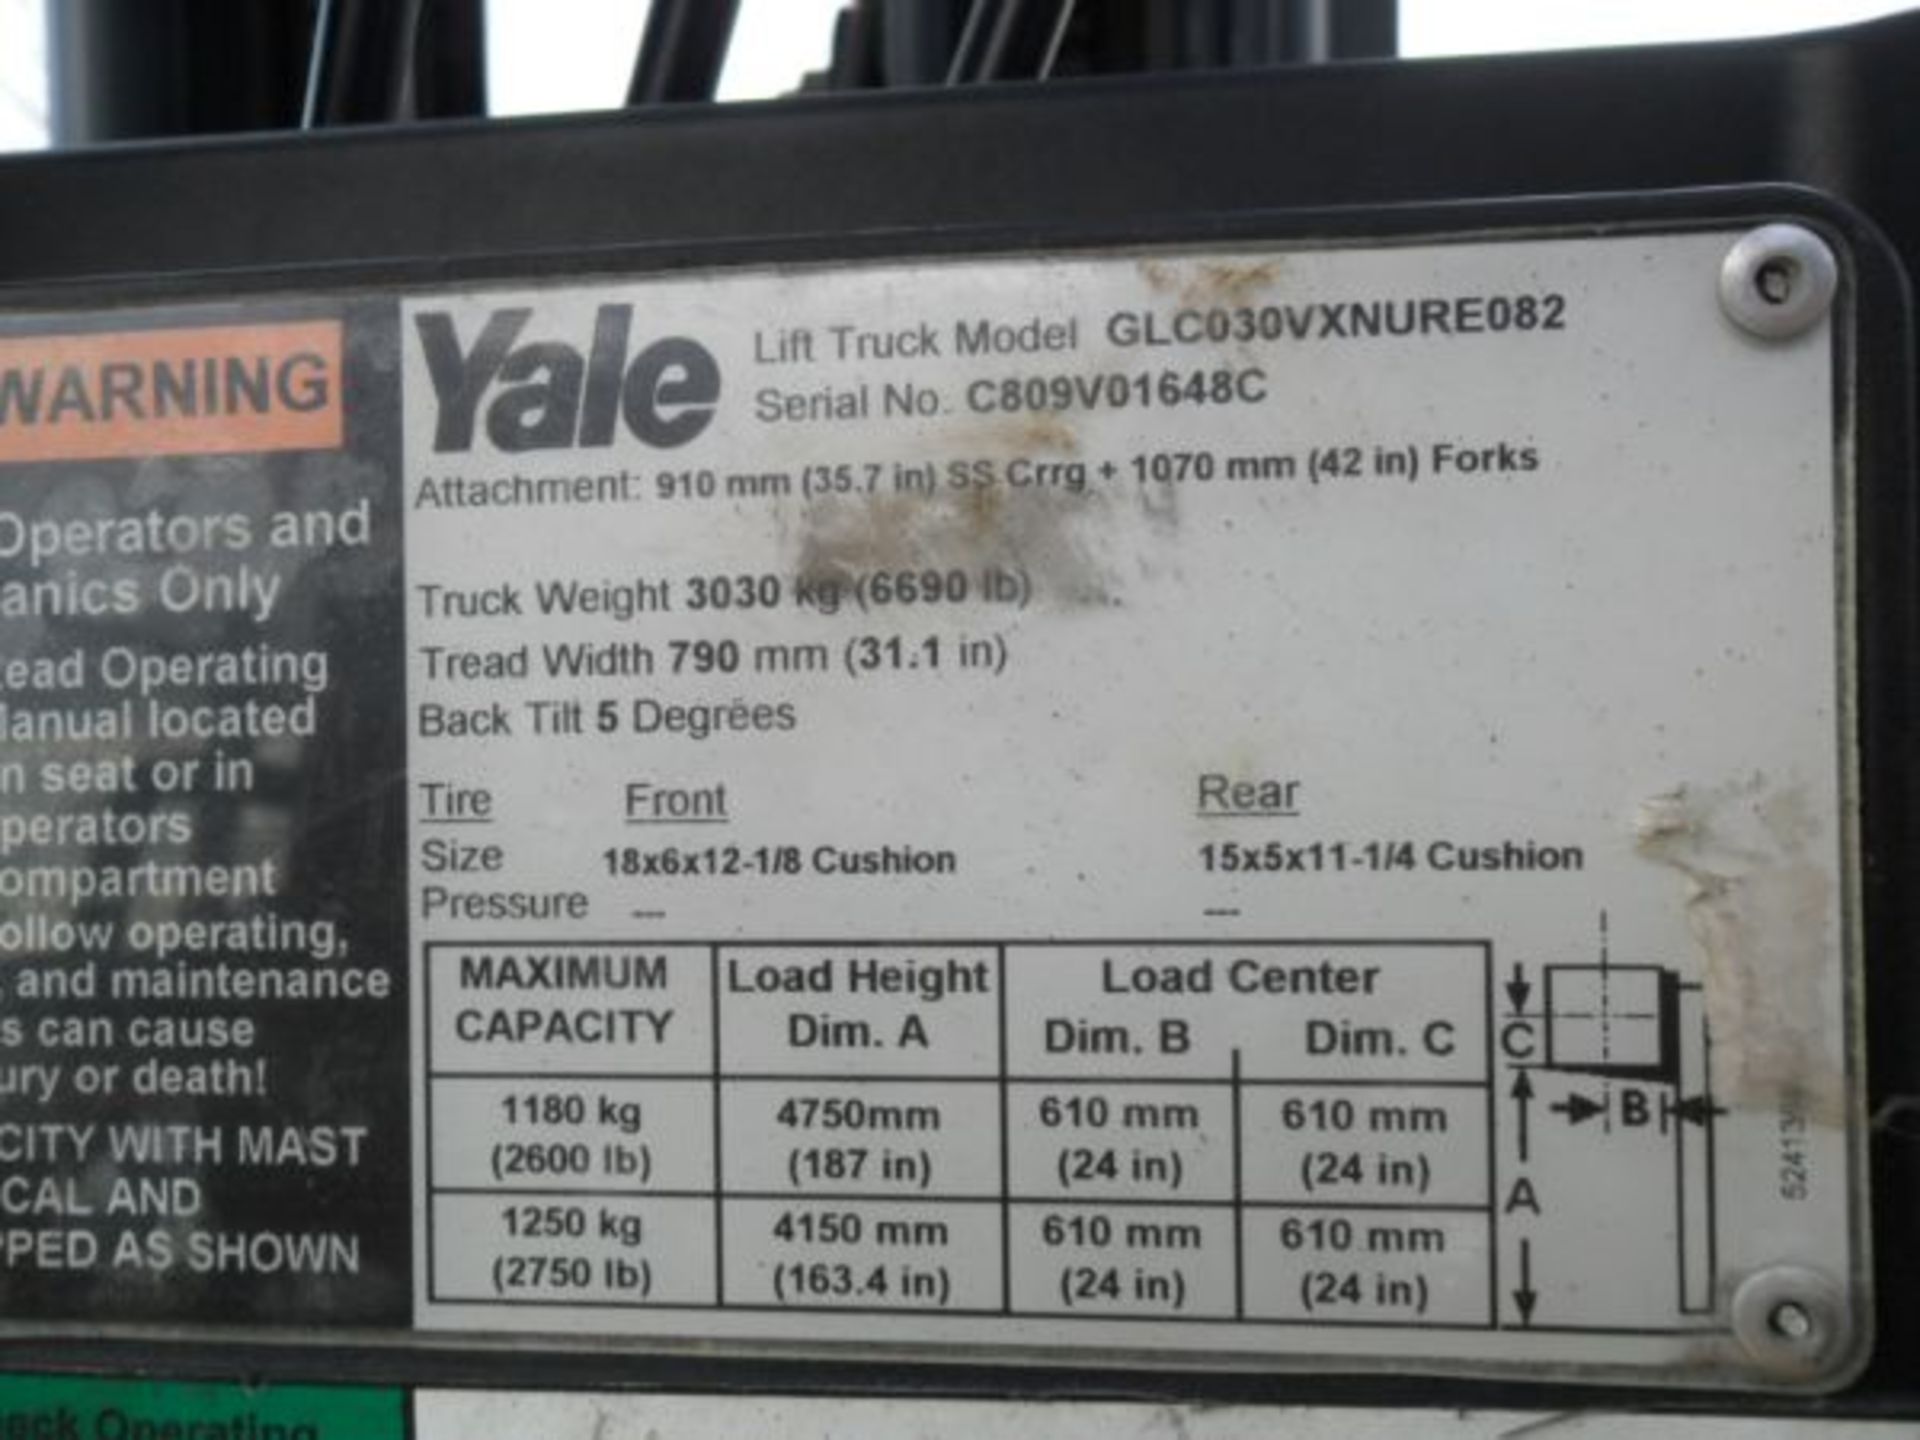 3,000 LB YALE MODEL GLC030VXNURE082 SOLID TIRE LP GAS LIFT TRUCK; S/N C809V01648C, 3-STAGE MAST, 82" - Image 4 of 4